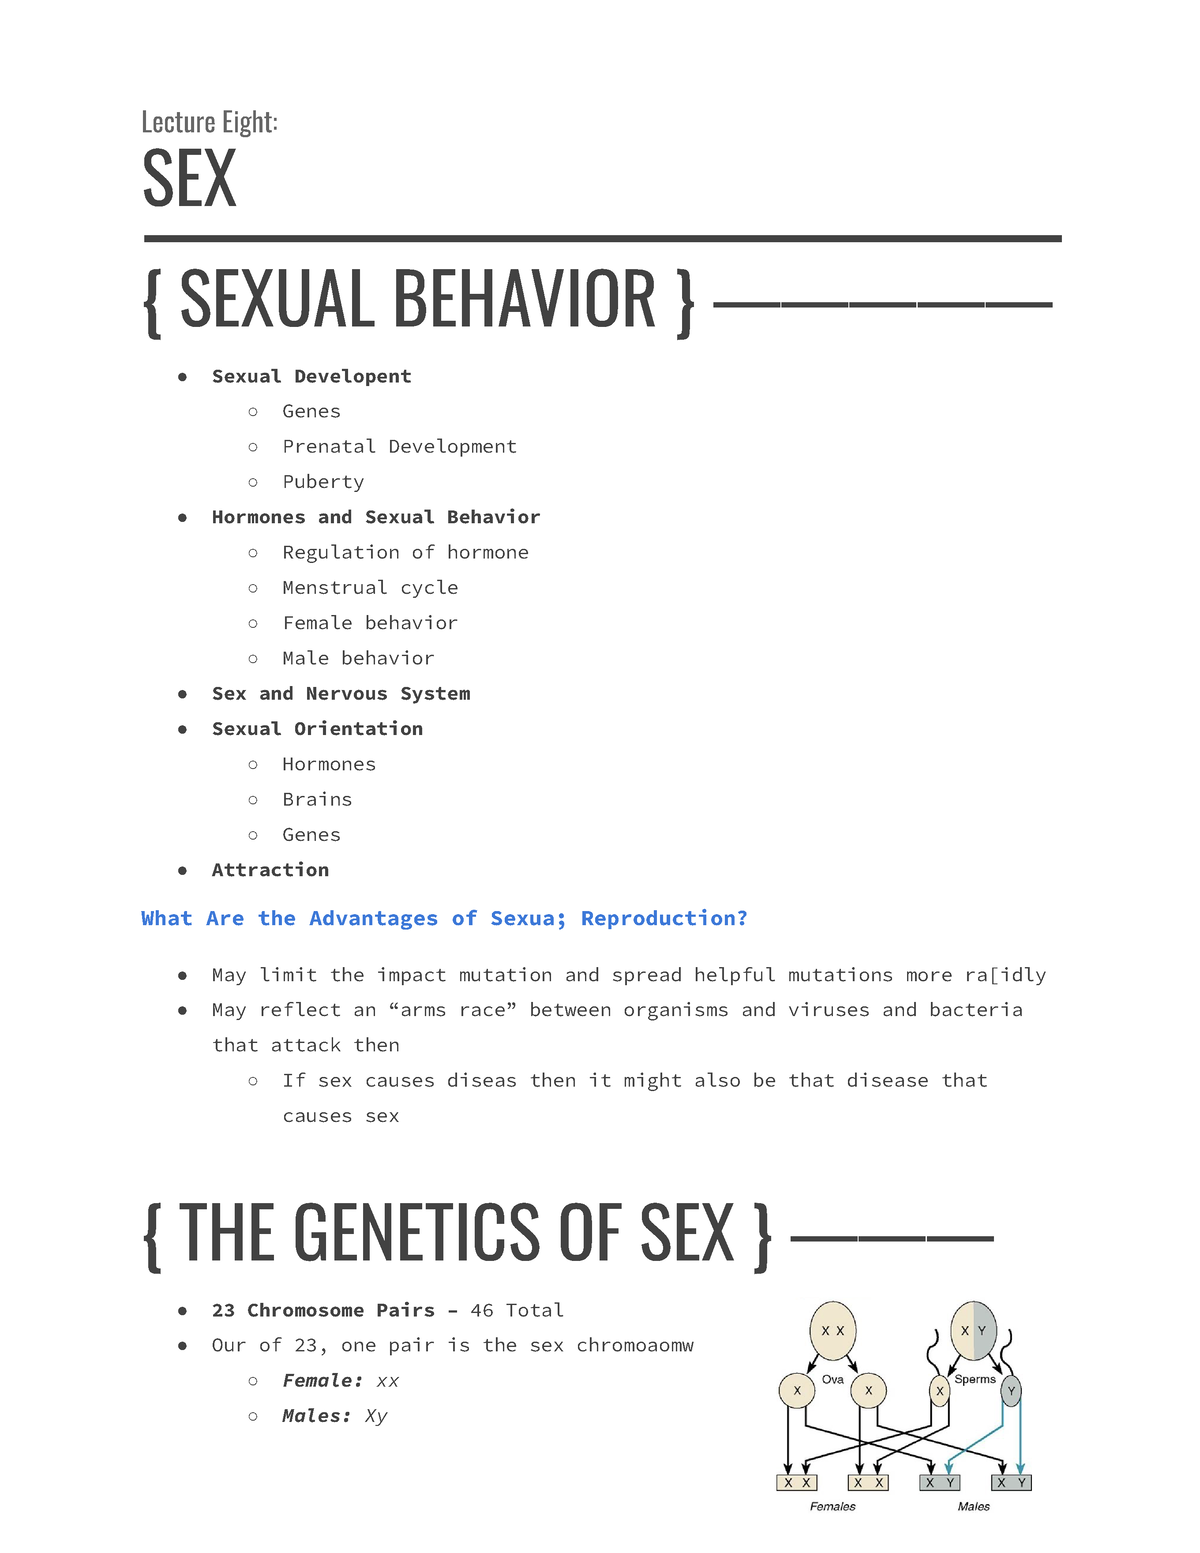 Sex Lecture Notes Sex And Homeostasis Lecture Eight Sex Sexual Behavior ————— Sexual 8482